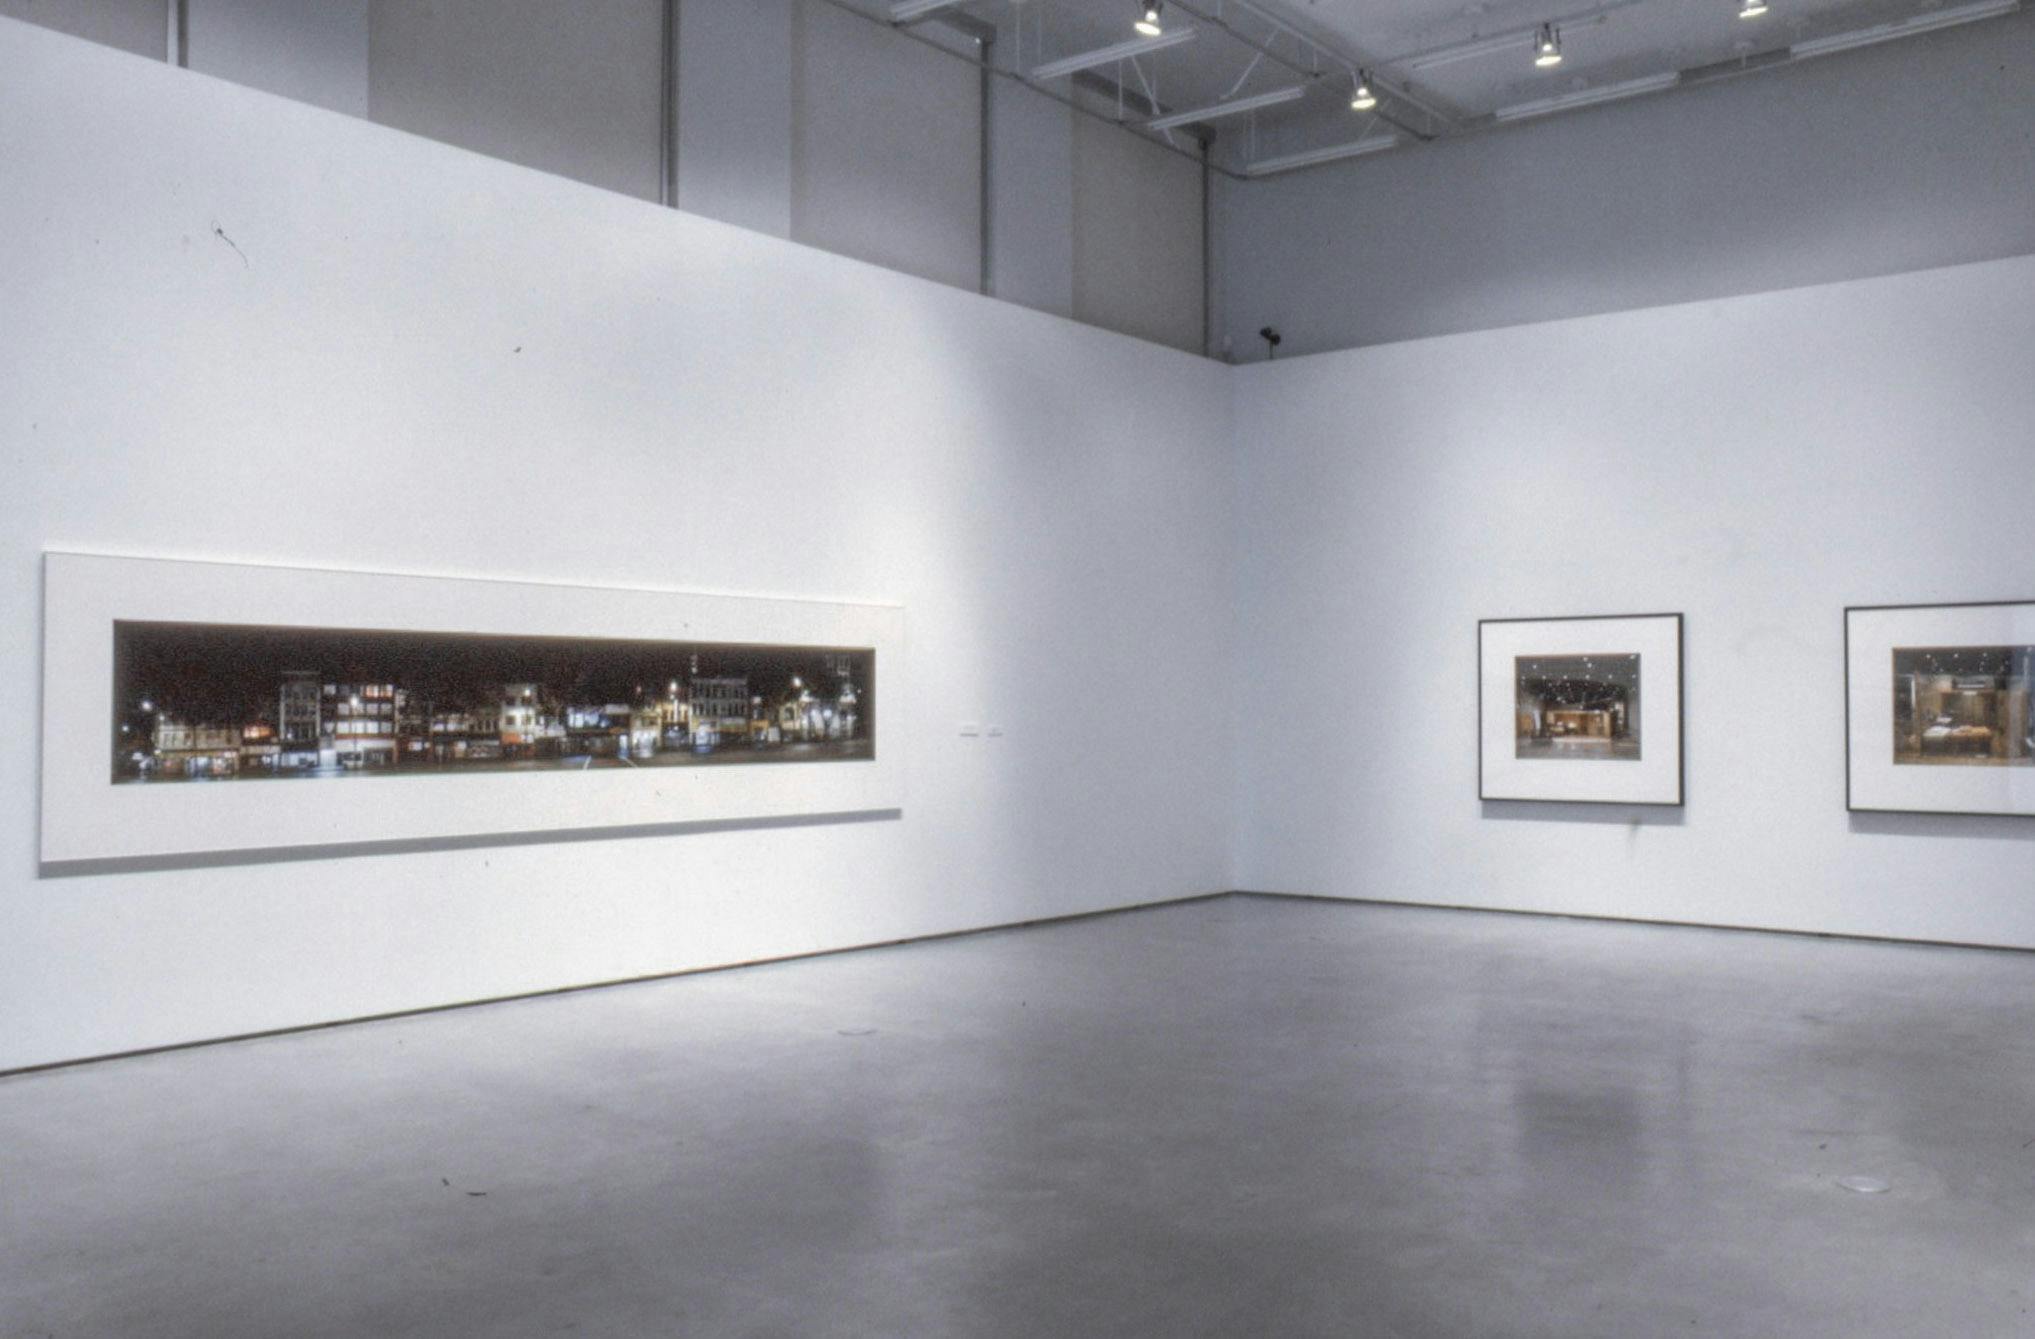 Several photographs are mounted on the gallery walls. The one mounted on the left-hand side wall is a panorama view of a street taken at night. Two smaller photographs are mounted on the other wall.